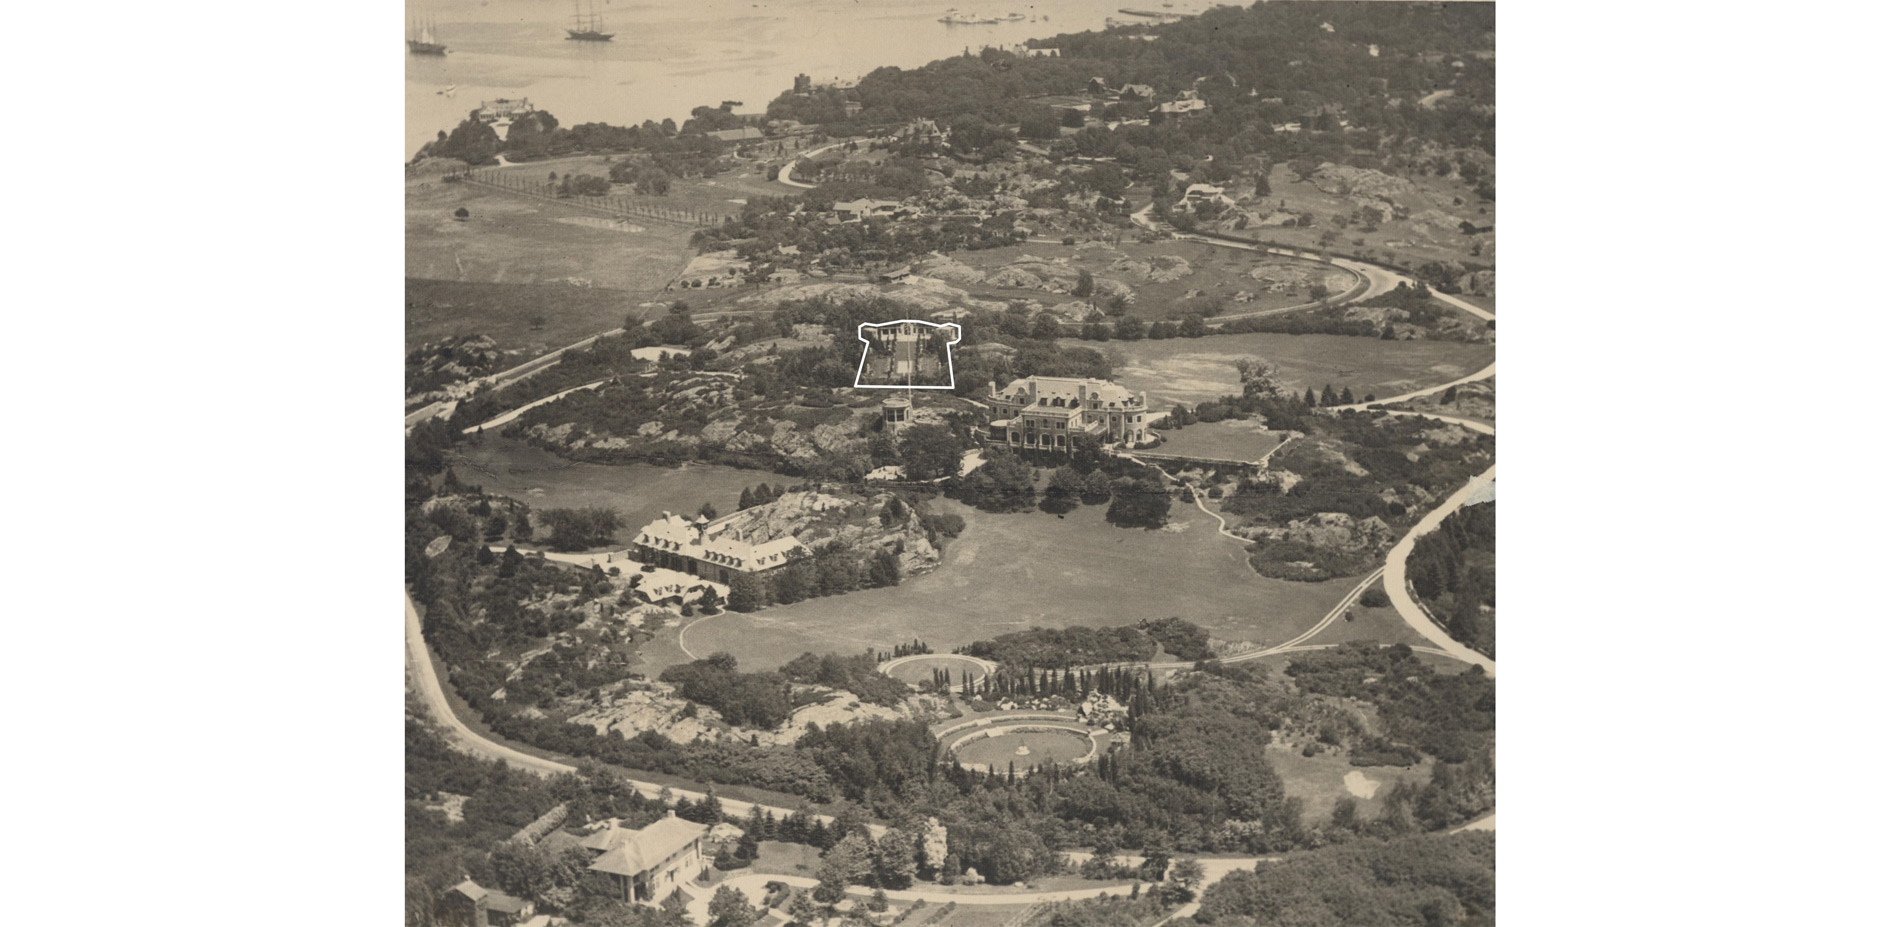 An aerial view from 1913 shows the extent of the James’s 125-acre Beacon Hill House estate in Newport, with The Blue Garden located. The original land…